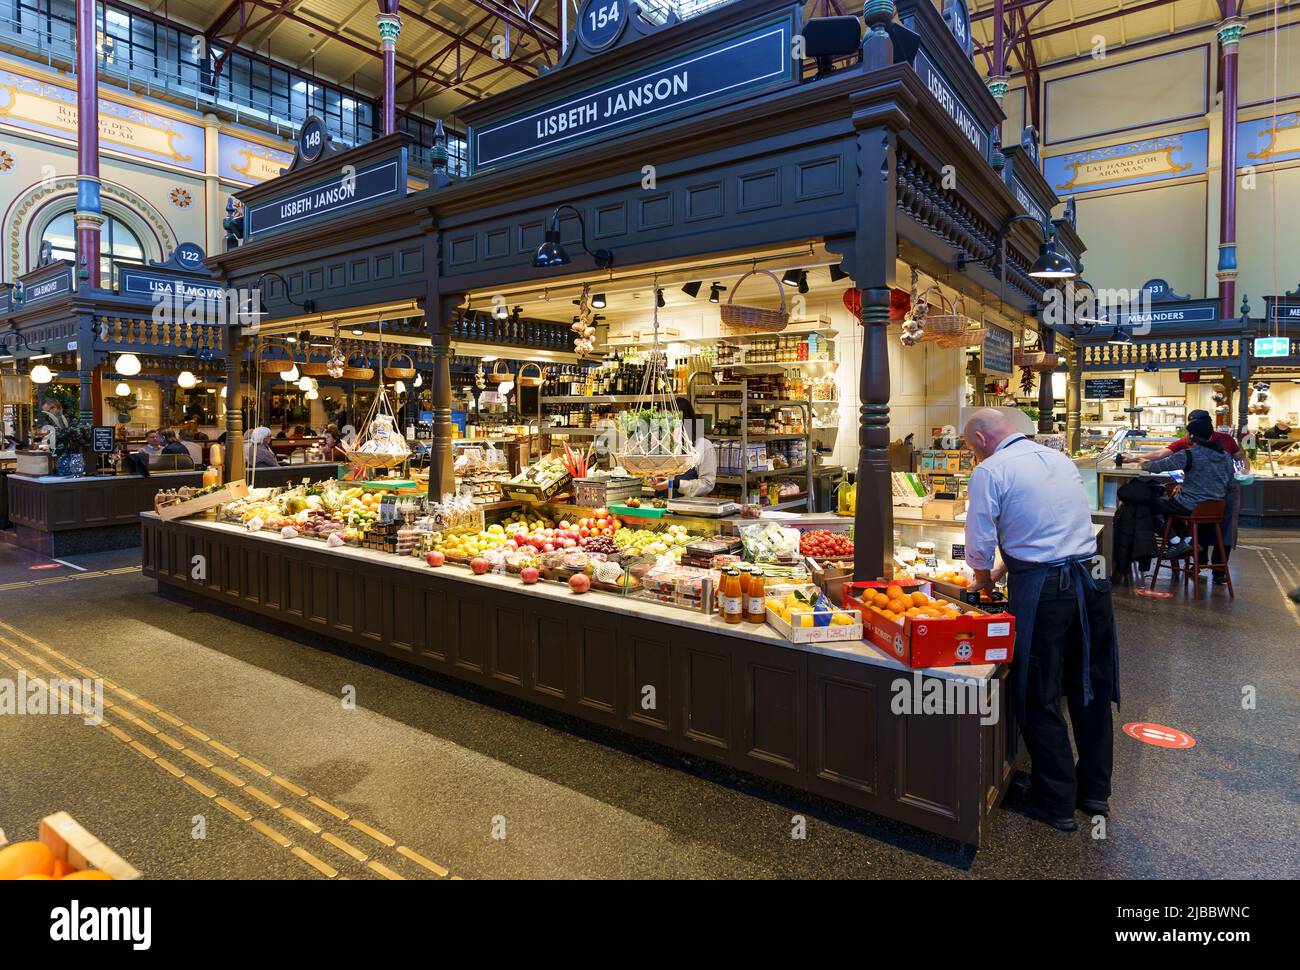 Stockholm, Sweden - February 15 2022: People shop for fresh food in the famous Östermalms Saluhall food hall that dates back to 1888 in Stockholm, Swe Stock Photo